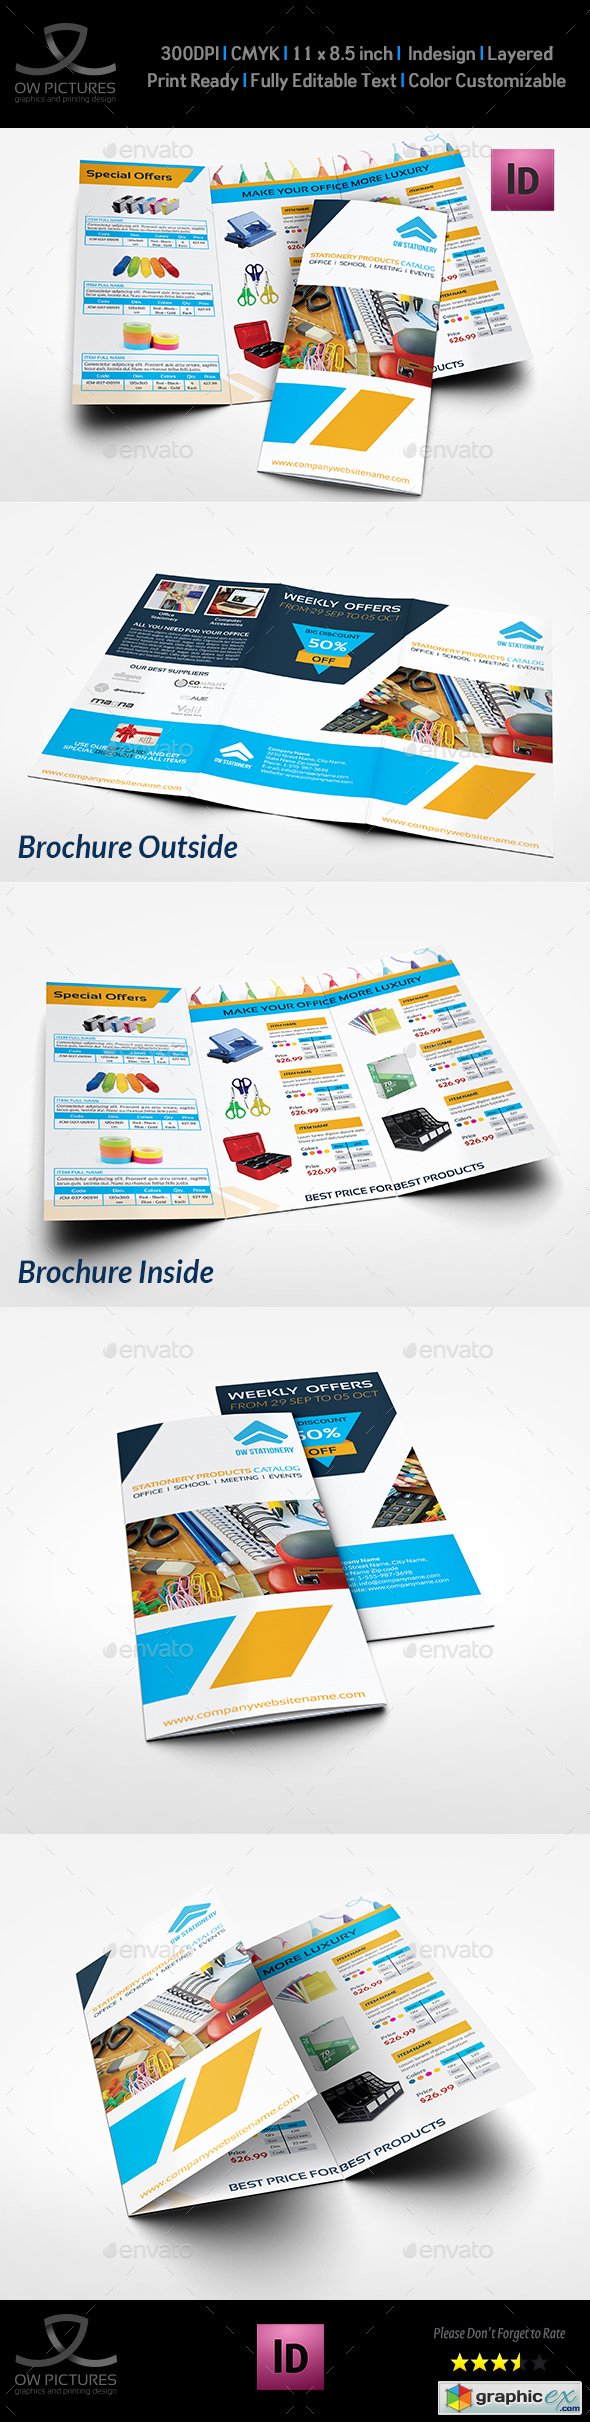 Stationery Products Catalog Tri- Fold Brochure Template